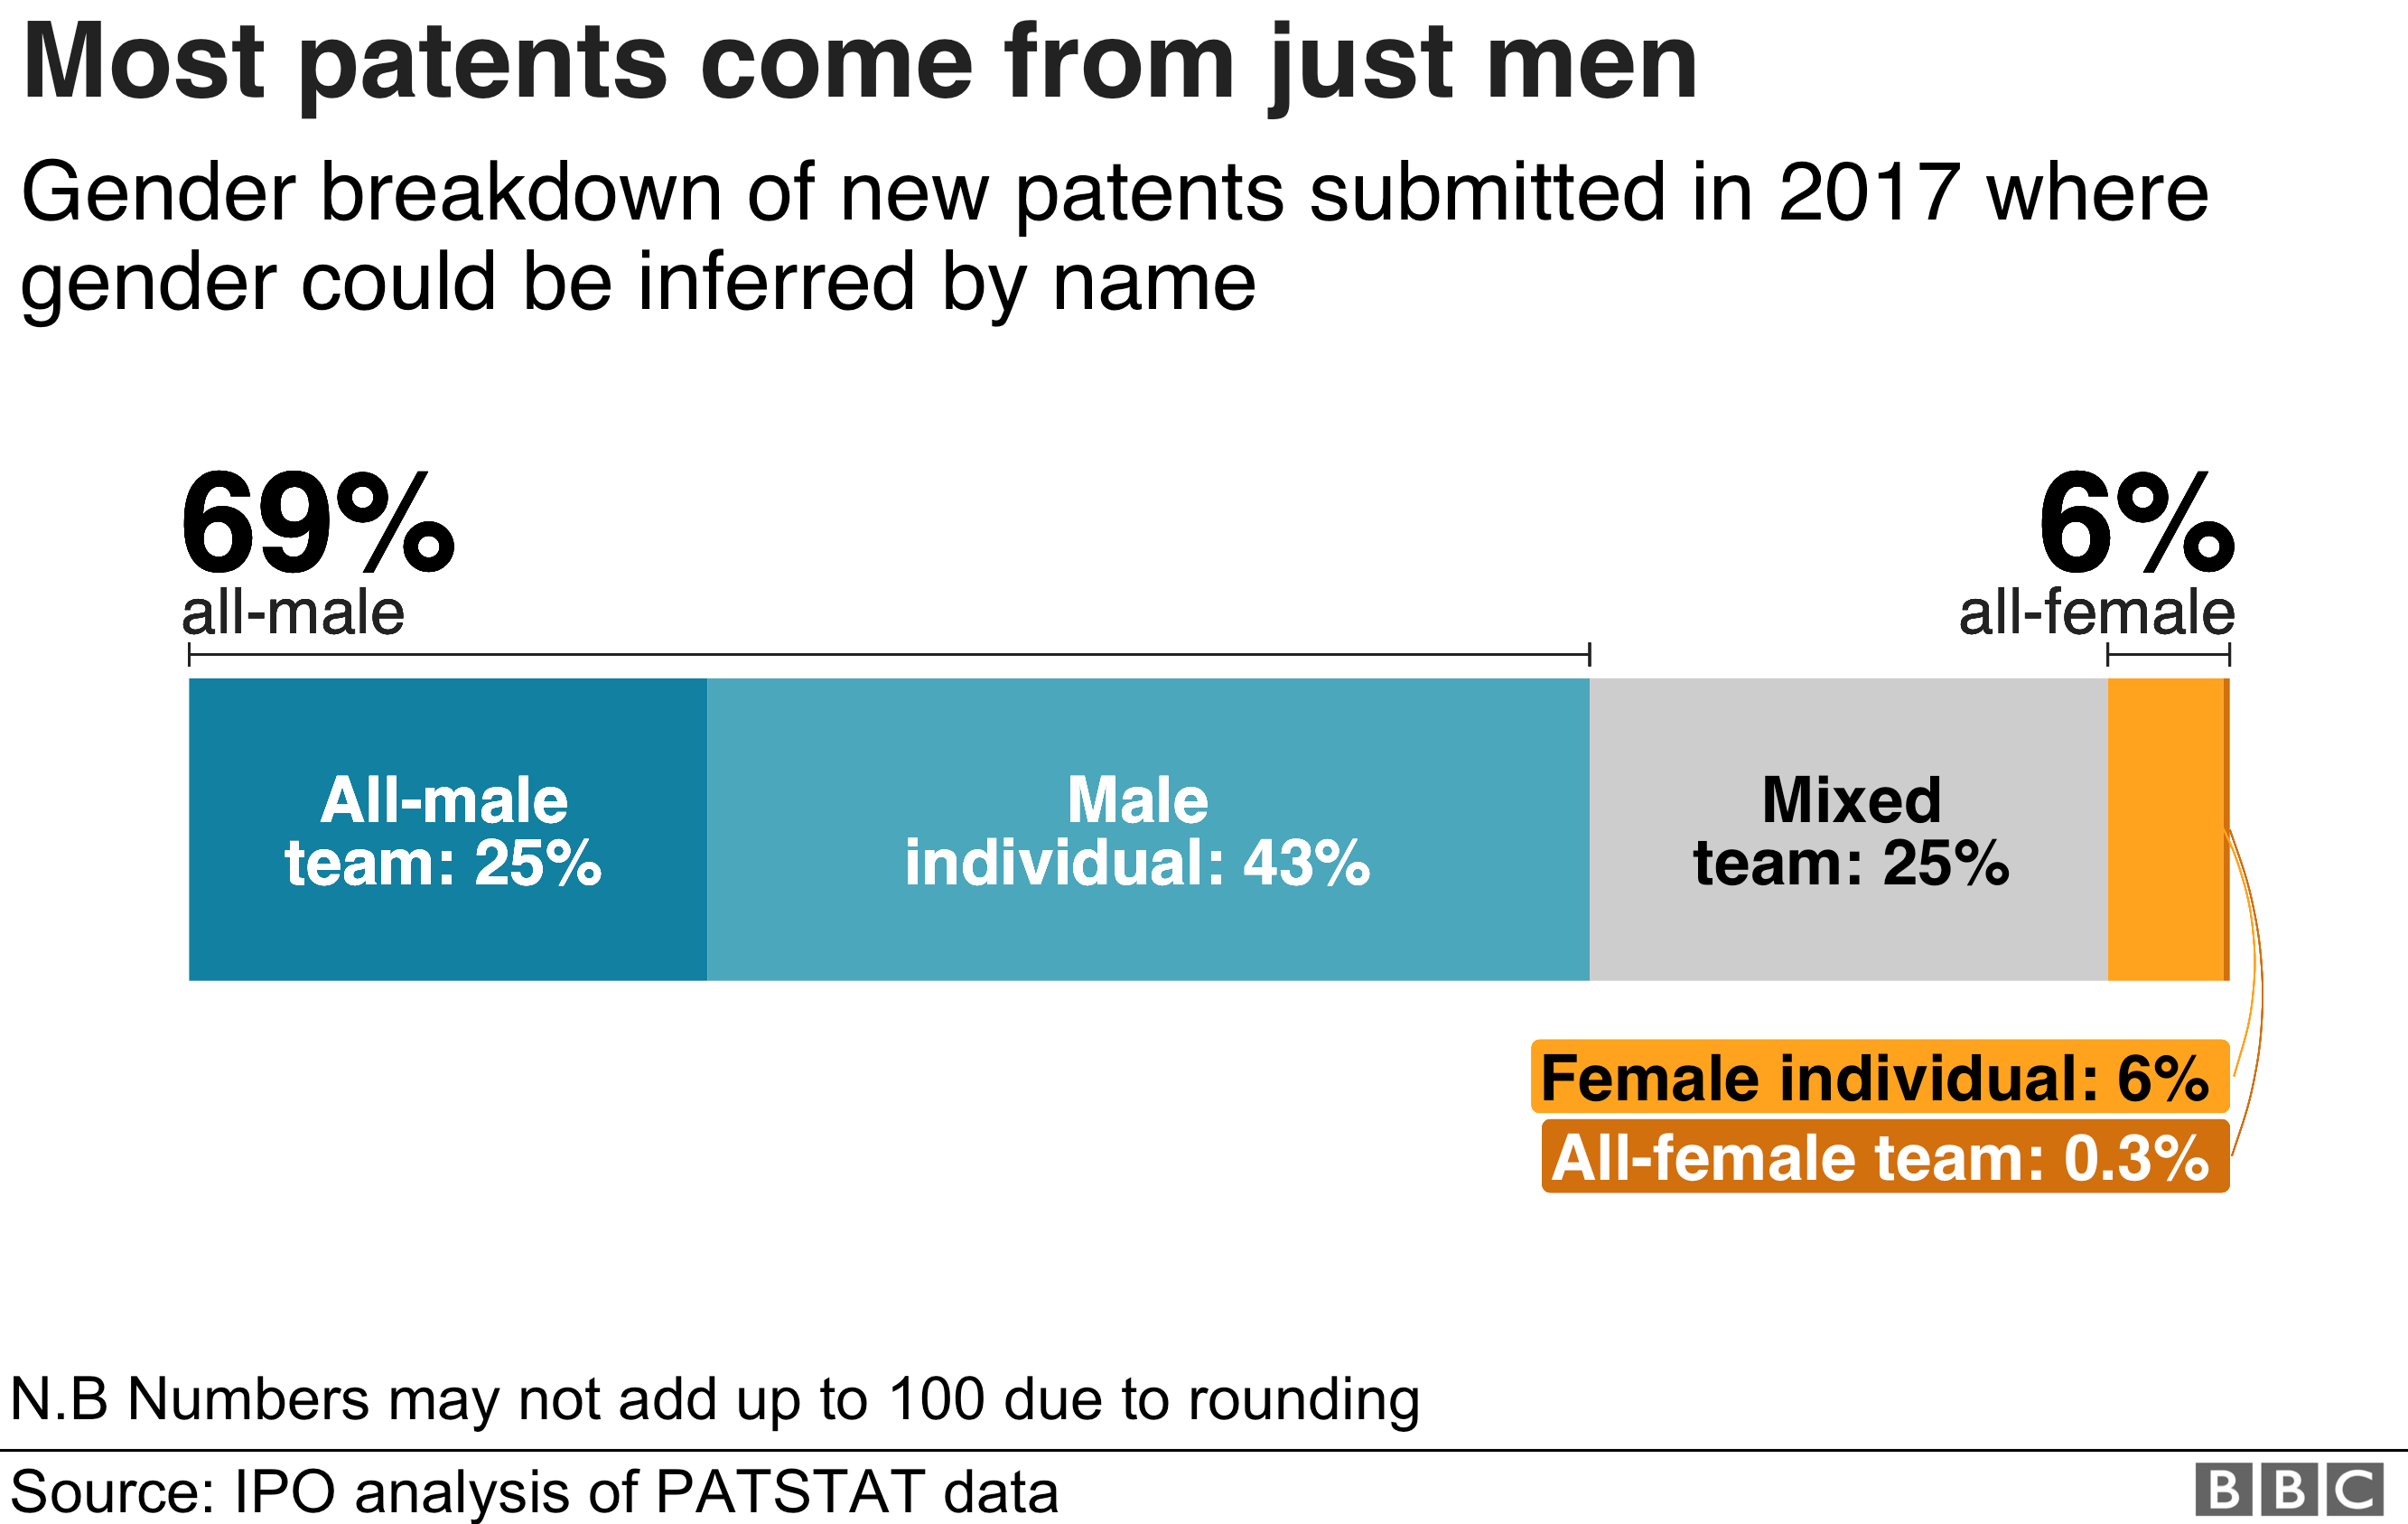 Chart showing that two-thirds of patent applications are all-male